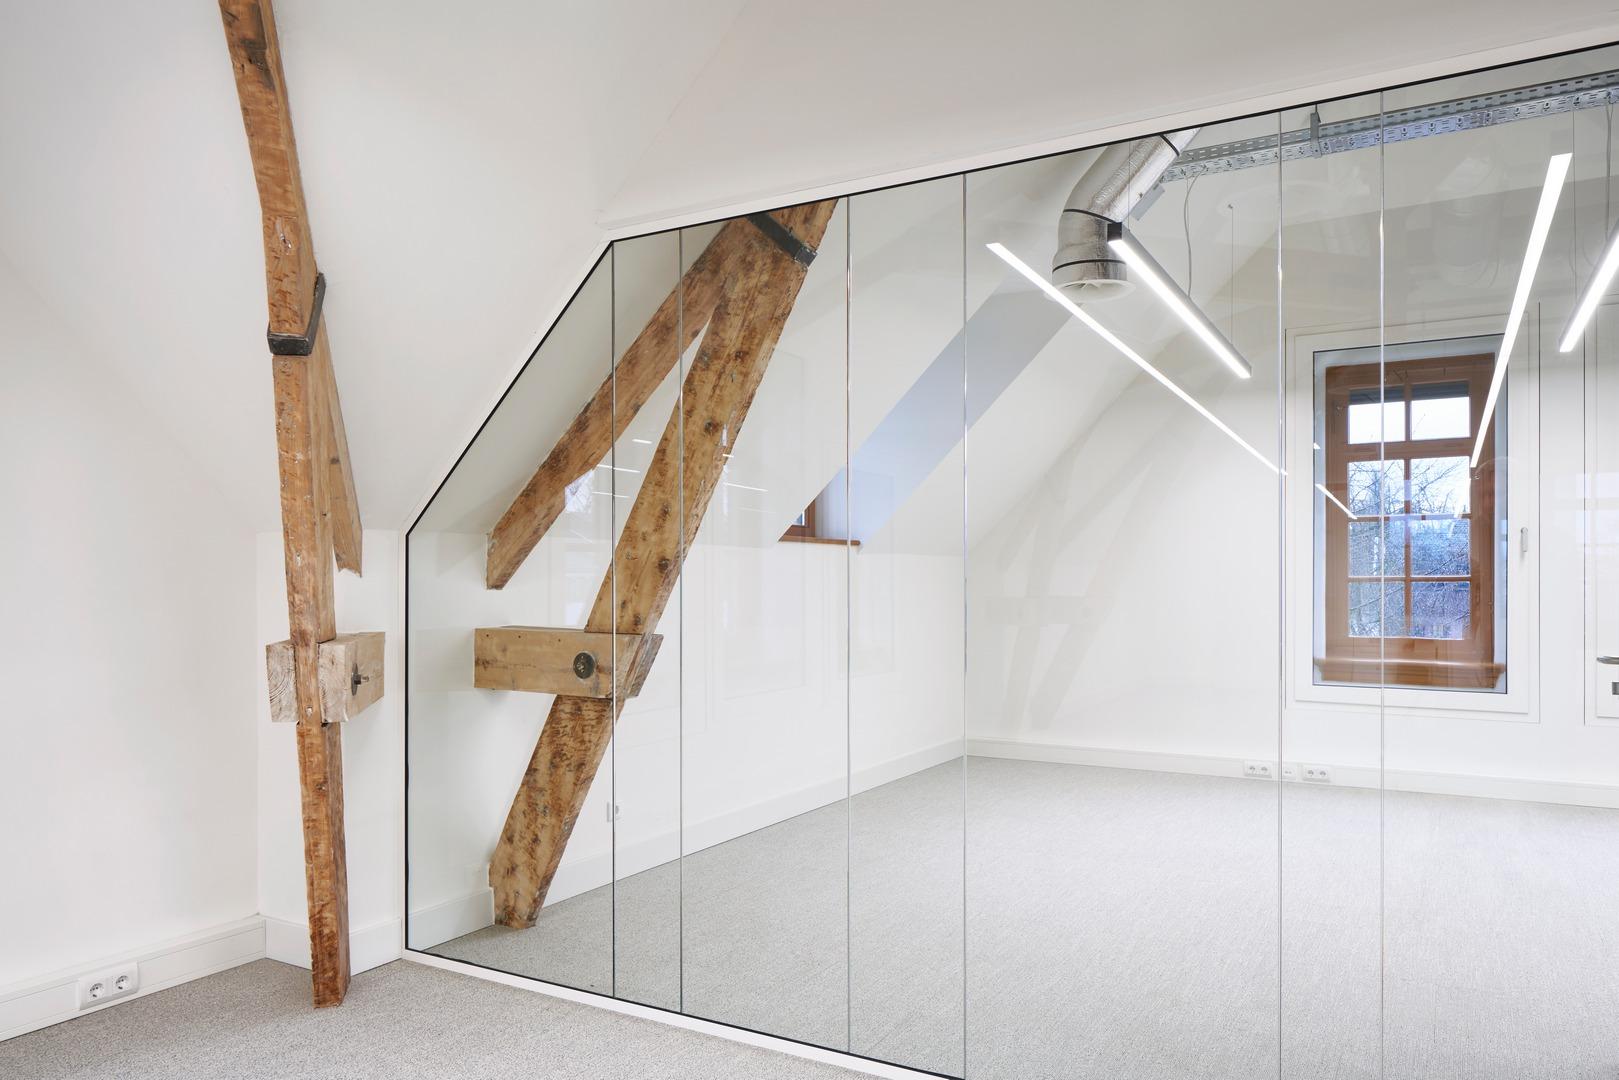 A partition wall made out of cutting loss of glass